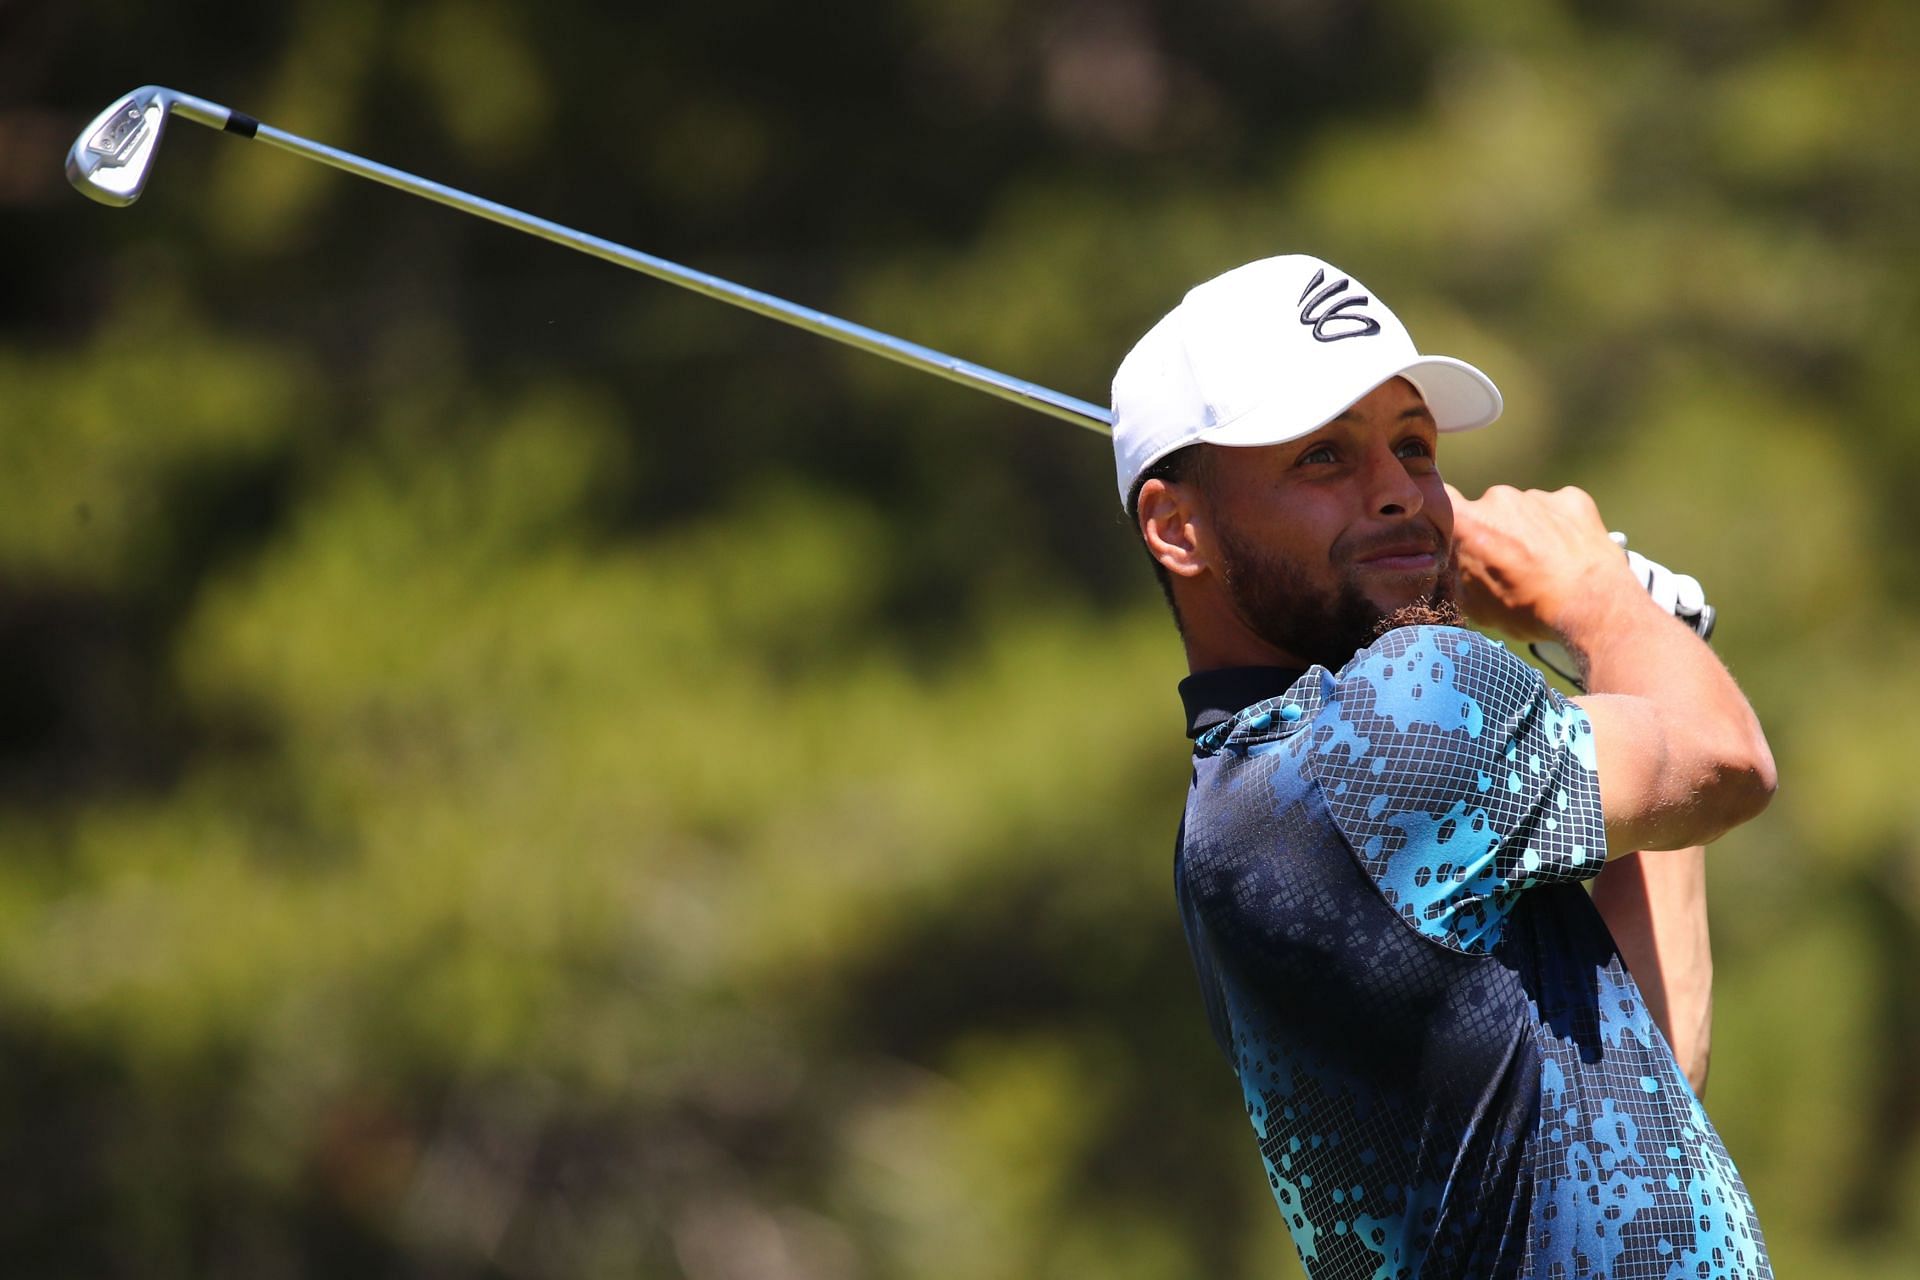 Steph Curry at the 2022 American Century Championship - Final Round